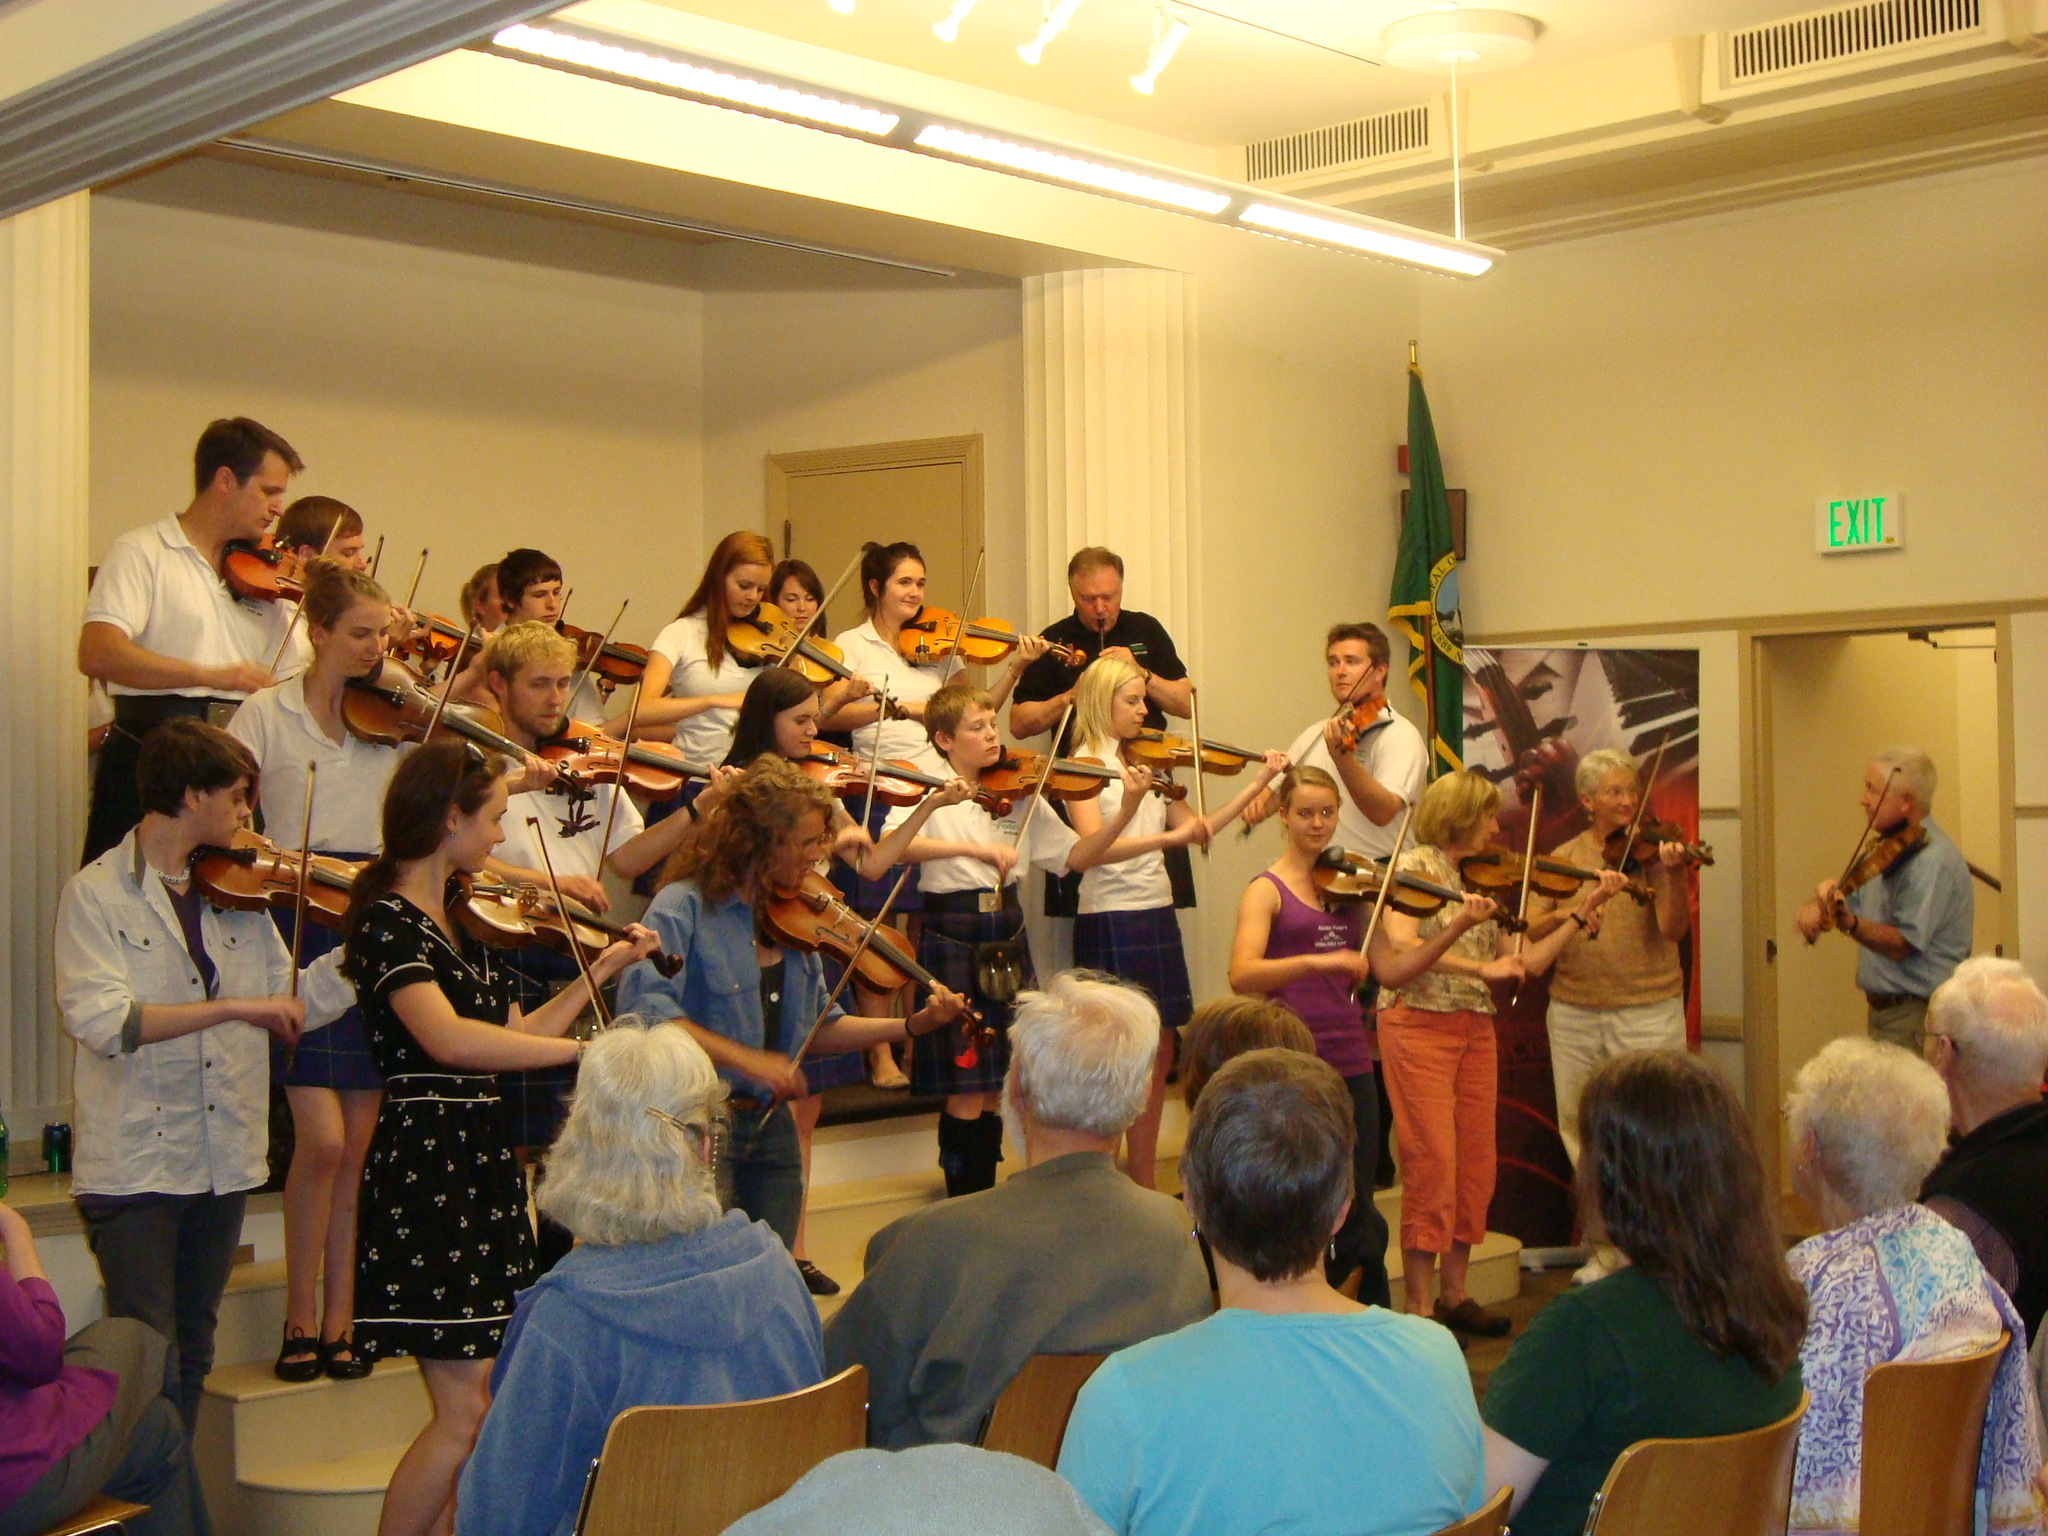 At the library, the Strathspey Fiddlers invited club members to join in on a final set of reels. It was magic!